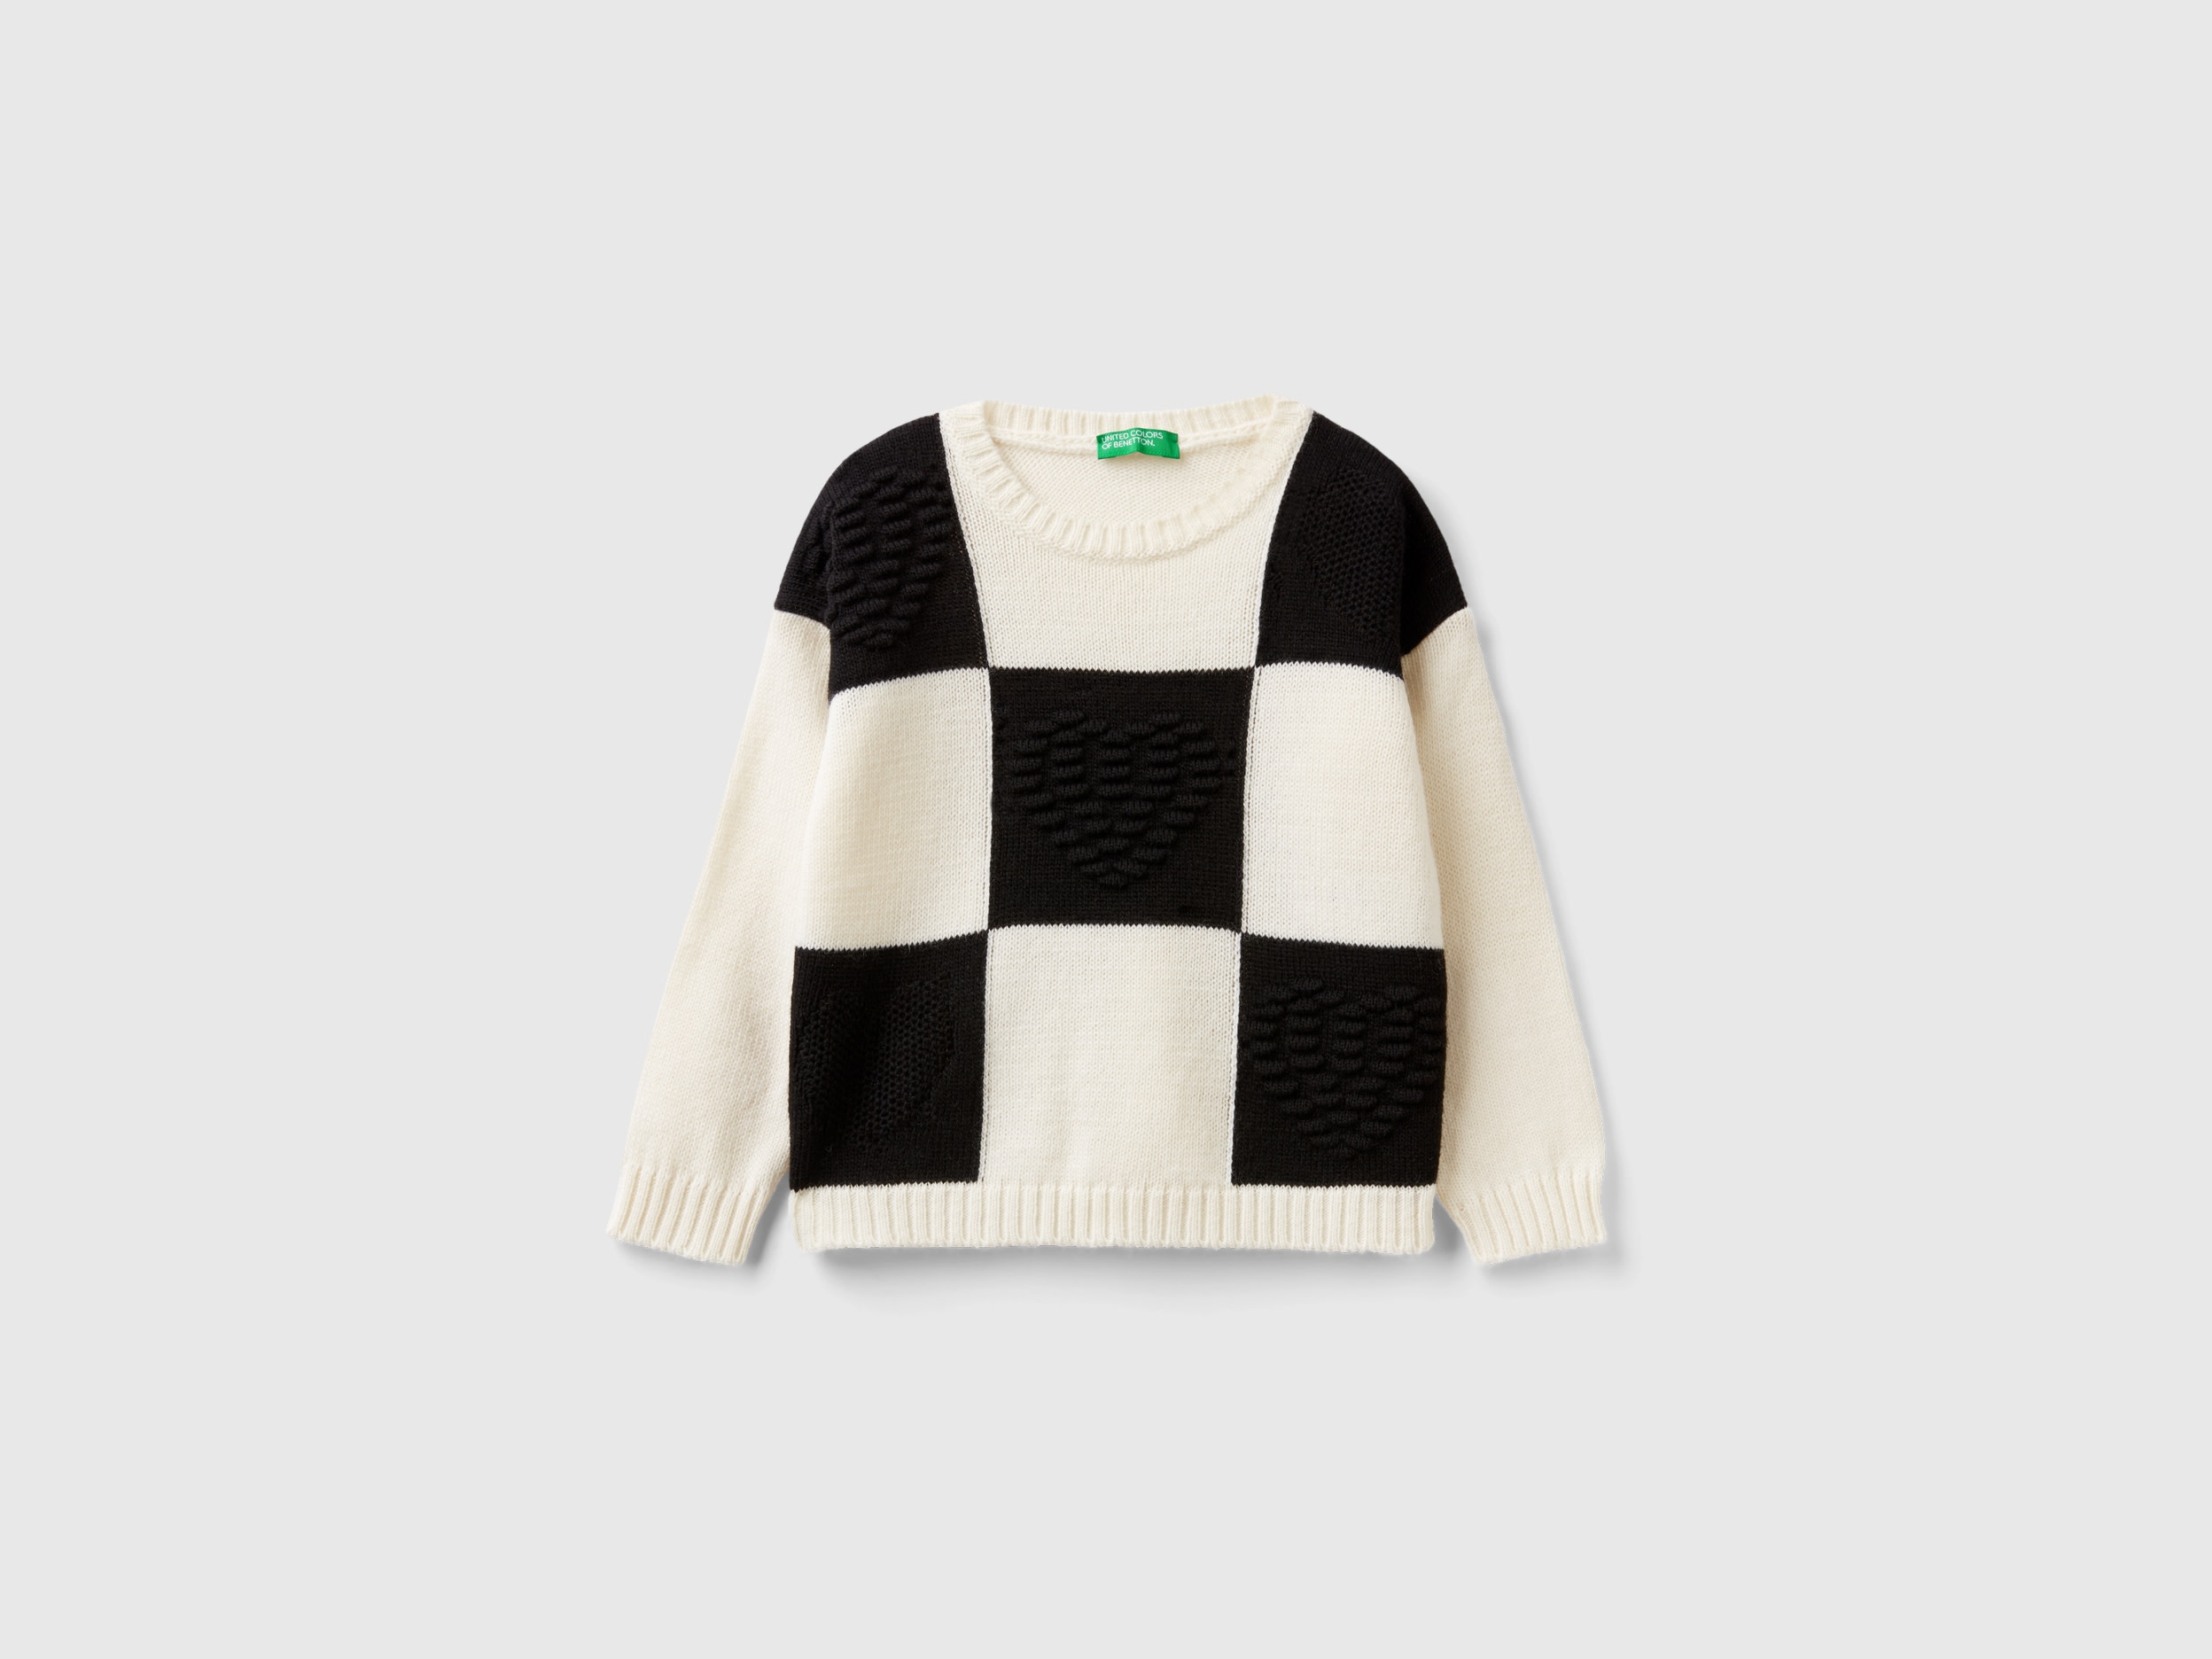 Benetton, Checkered Sweater With Hearts, size 12-18, Creamy White, Kids